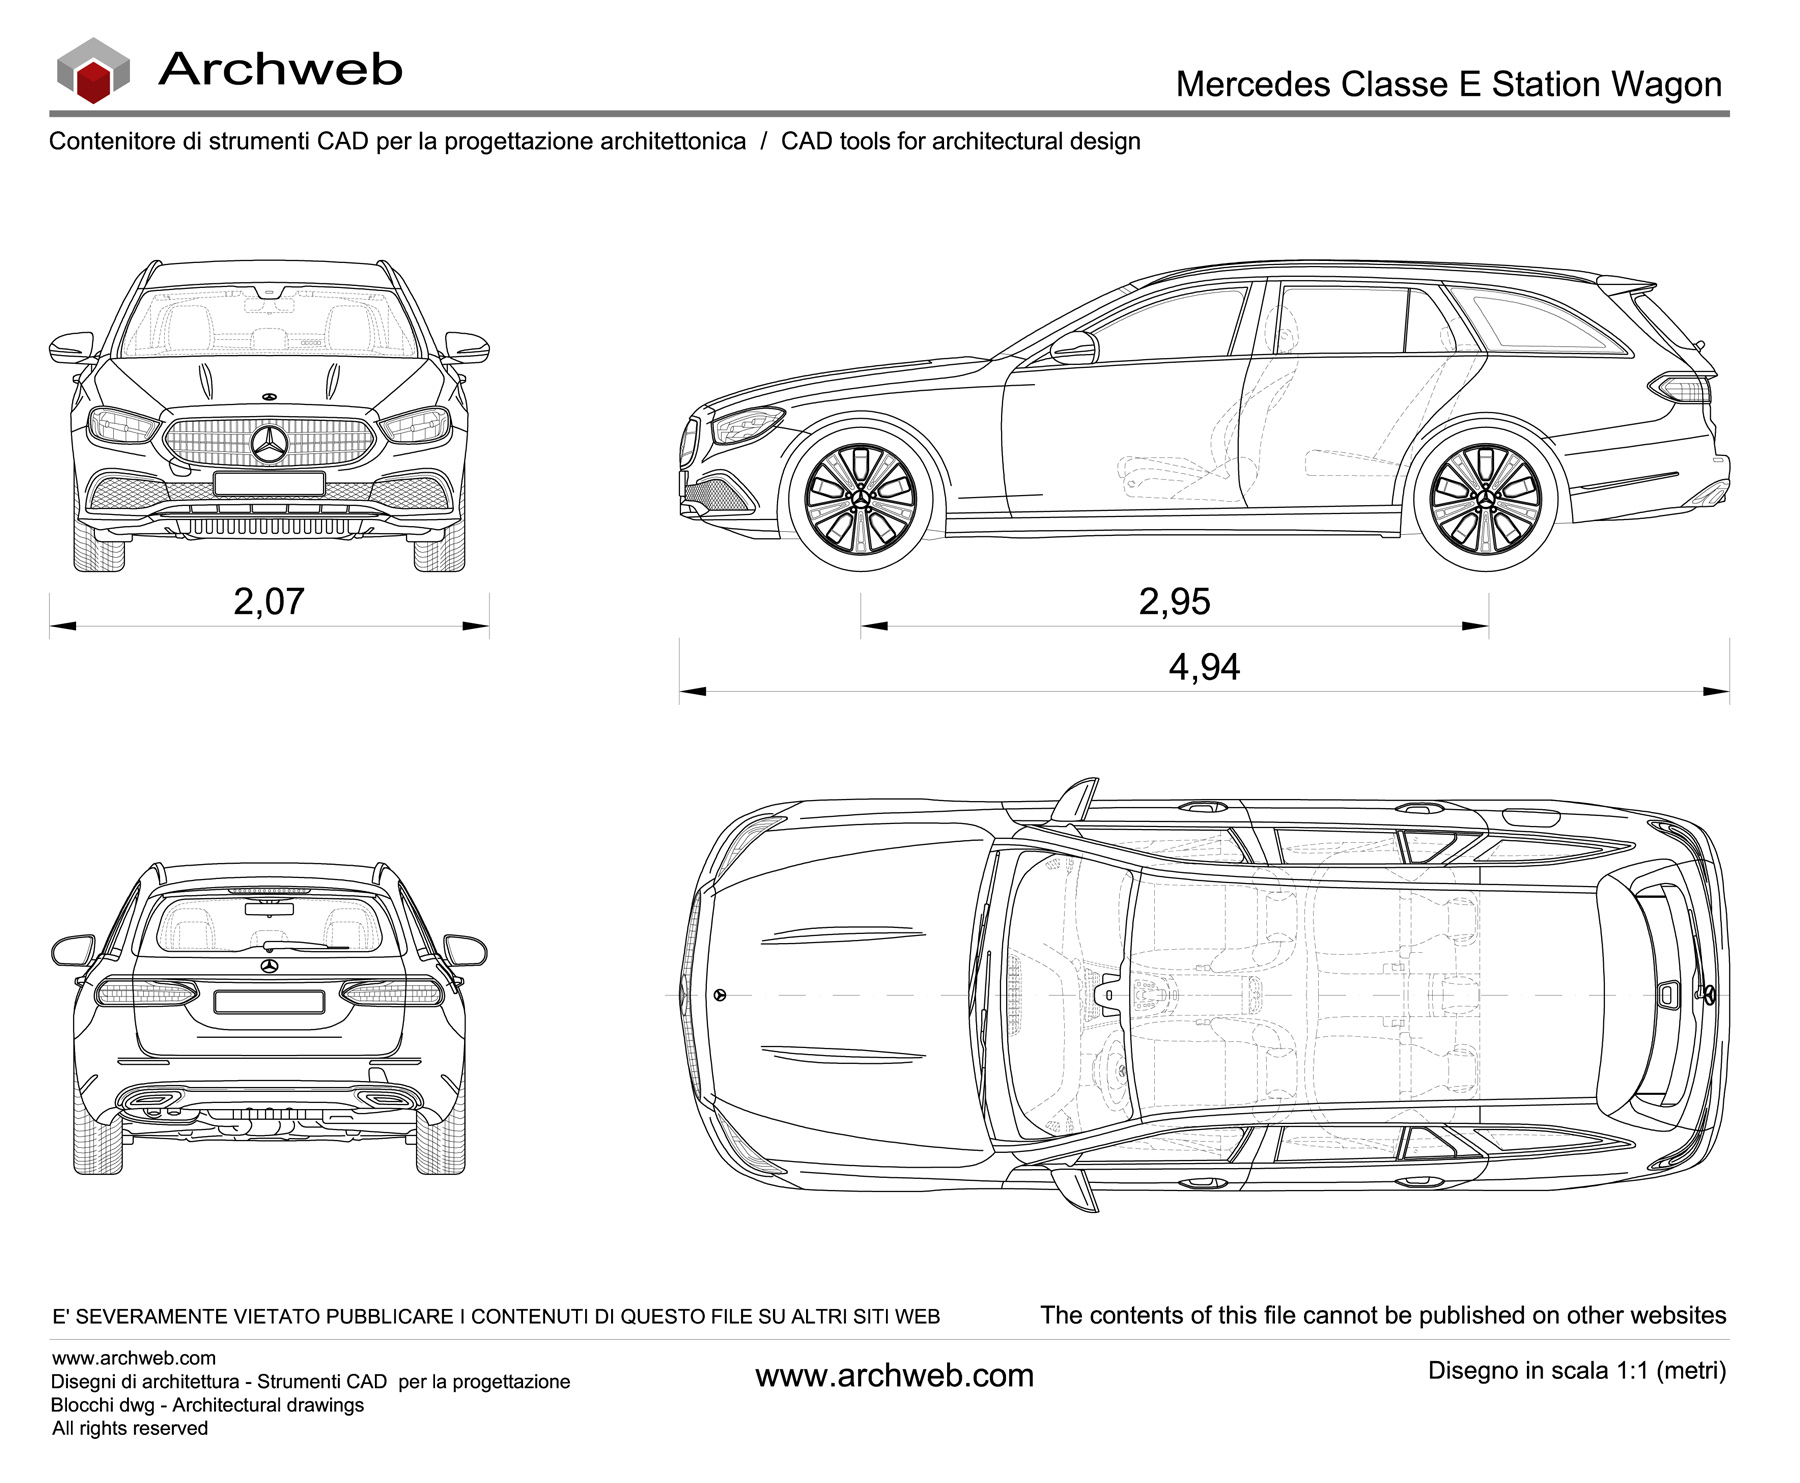 Mercedes E-Class Station Wagon drawing